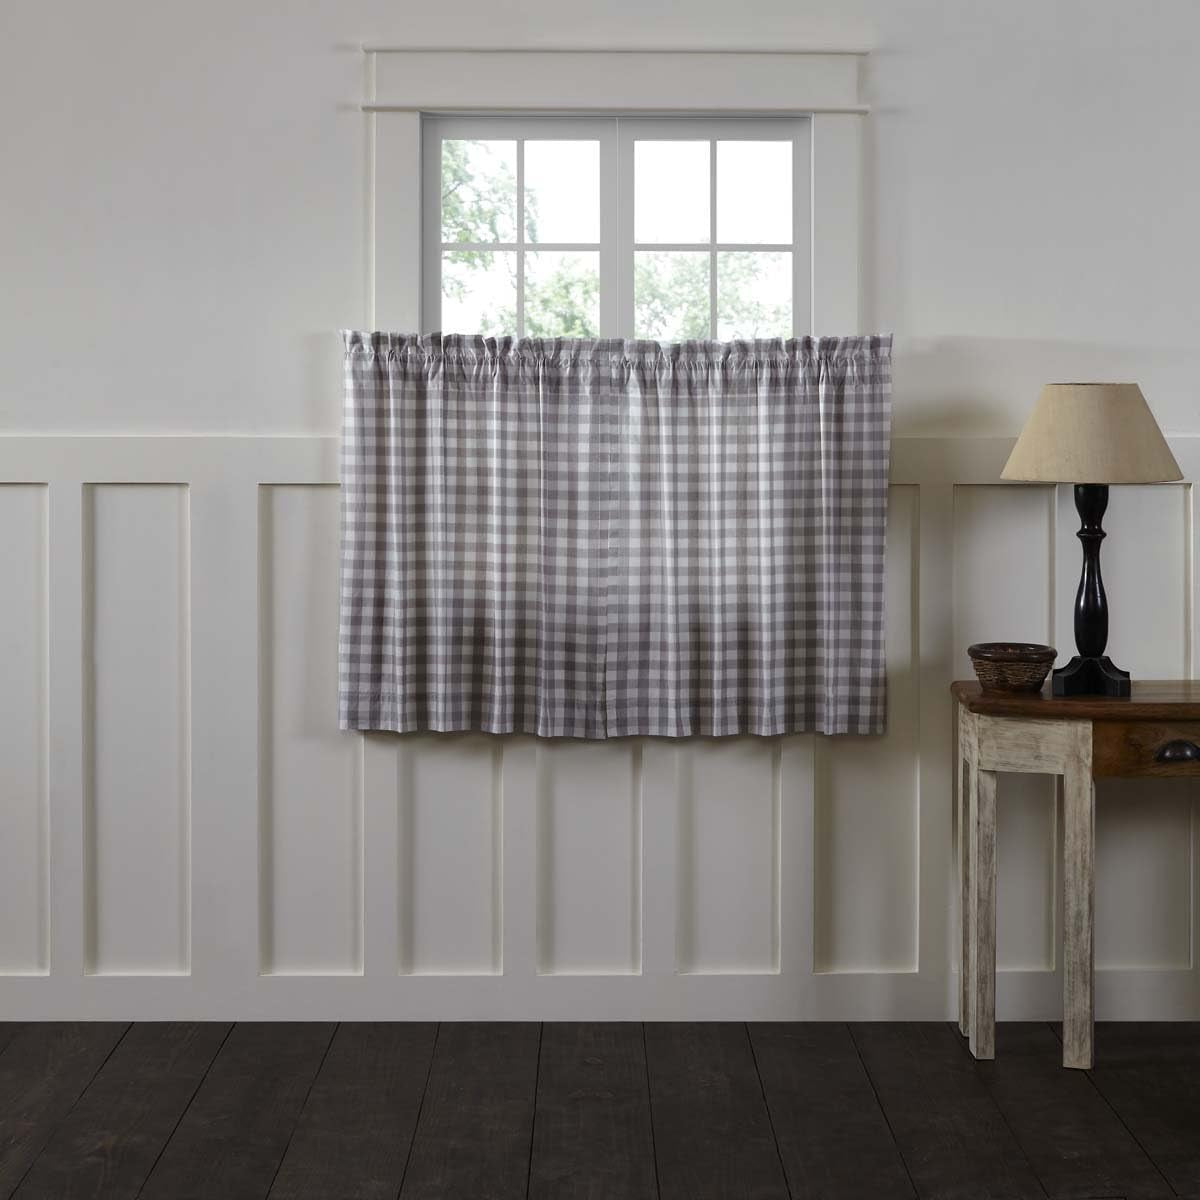 VHC Brands Farmhouse Grey Ash Buffalo Check Cotton Annie Curtains Rod Pocket Tie Back(S) Door Panel  VHC Brands Tan 36 In X 36 In (Tier Set) 